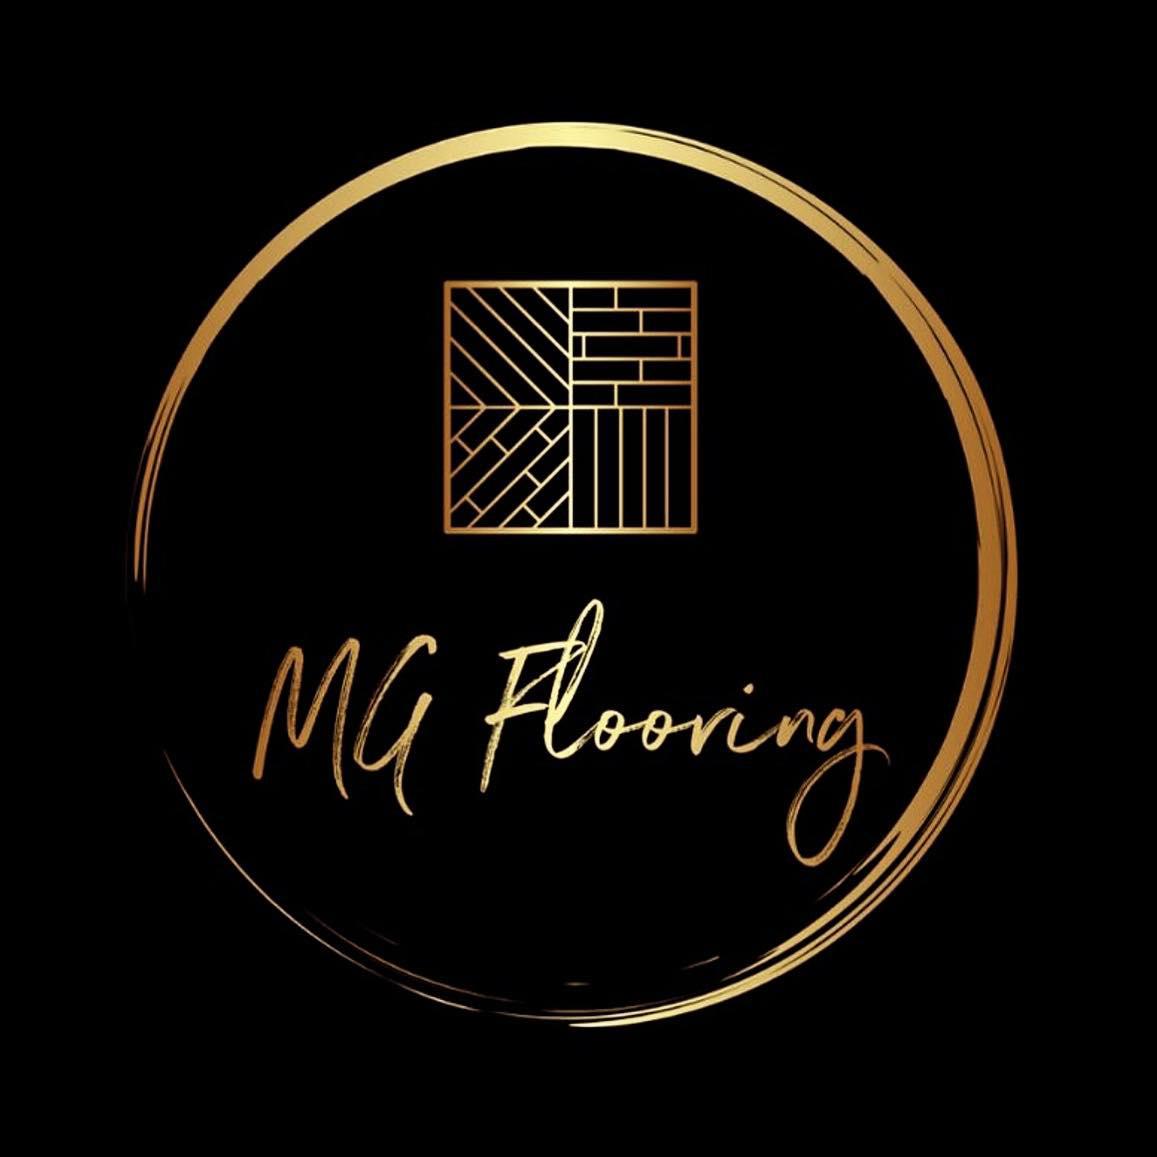 MG Flooring - Cirencester, Gloucestershire - 07860 161928 | ShowMeLocal.com